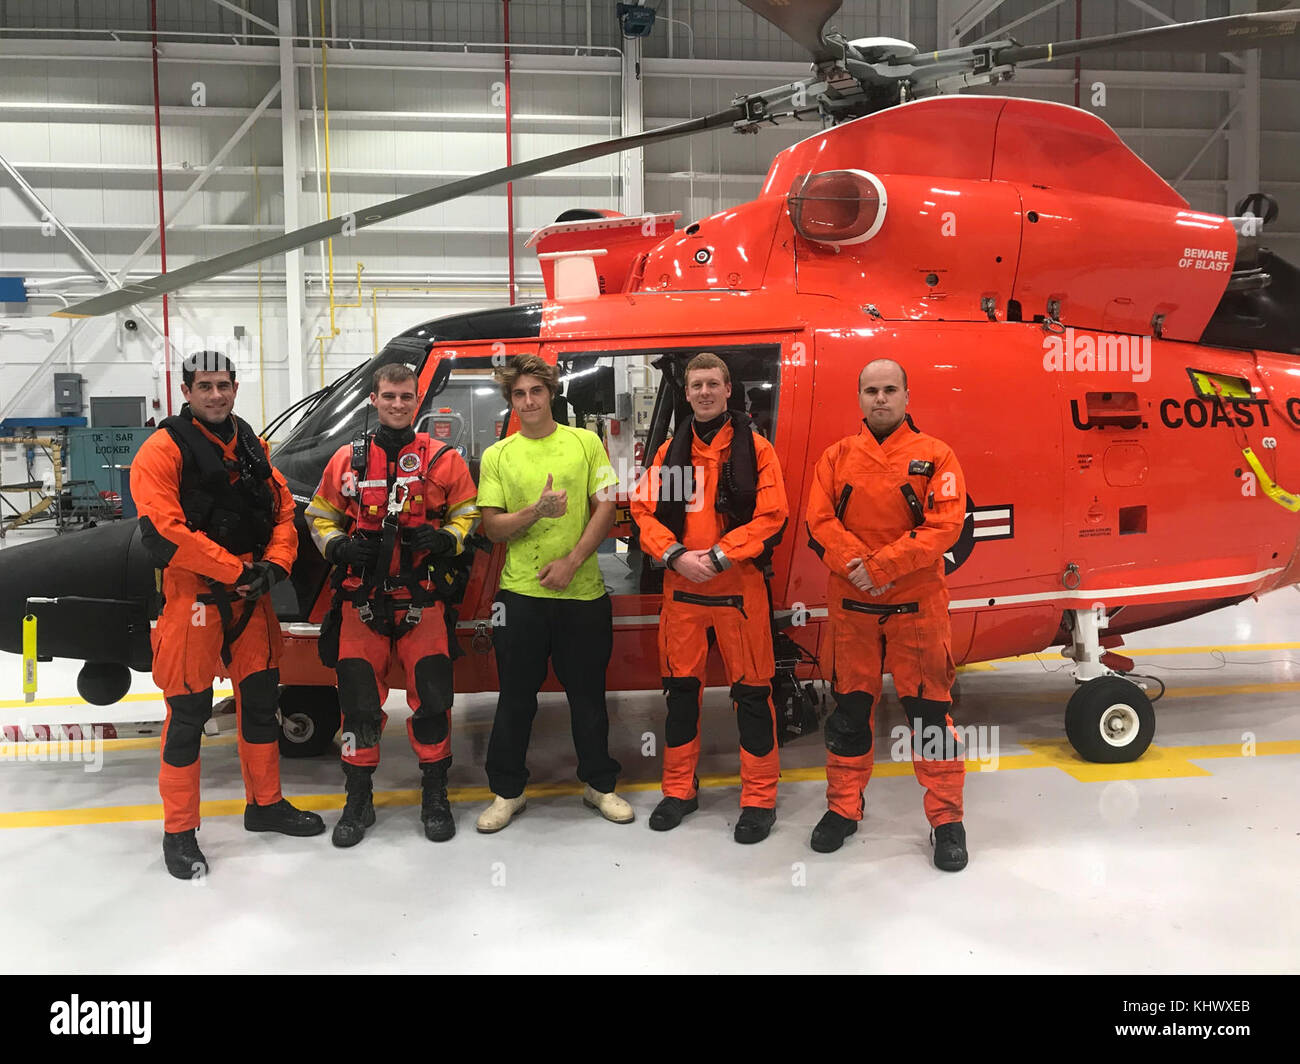 The Coast Guard rescued a man after his vessel grounded in Bastin Bay, Louisiana, November 18, 2017. A Coast Guard Air Station MH-65 Dolphin helicopter aircrew hoisted the man from his vessel and transported him back to base. (U.S. Coast Guard photo) Stock Photo